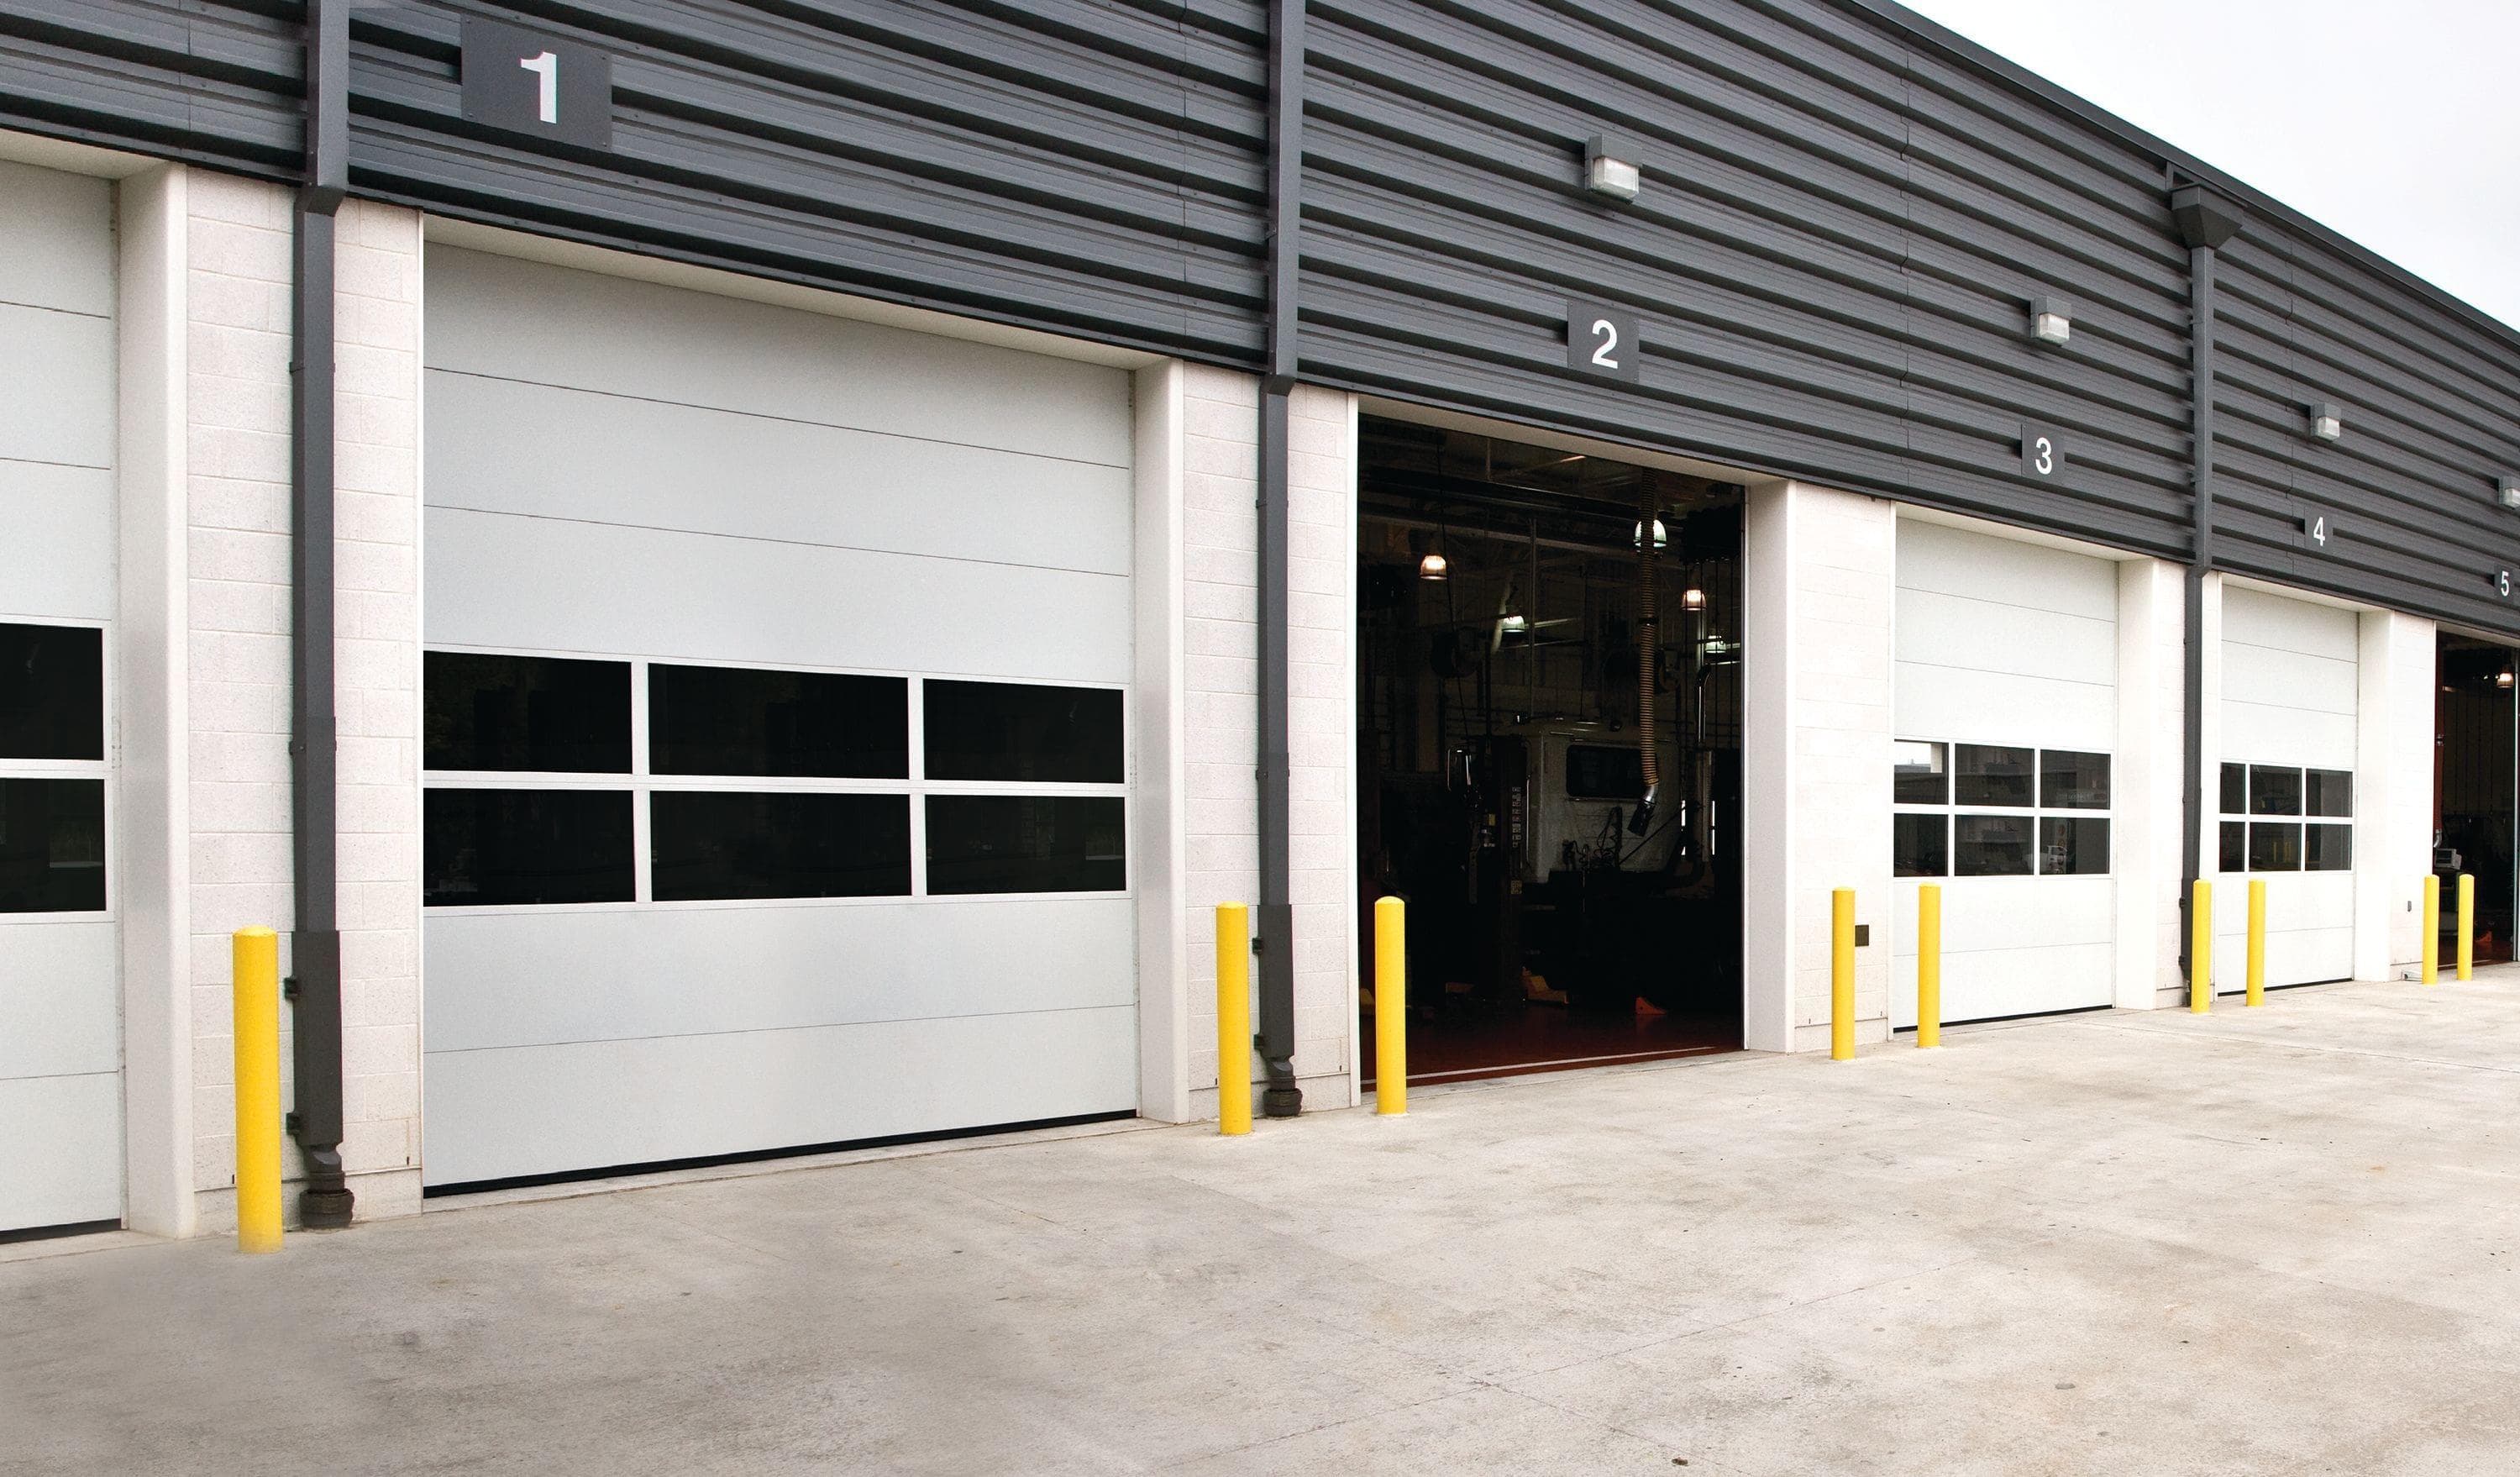 exterior of commercial building with row of overhead doors